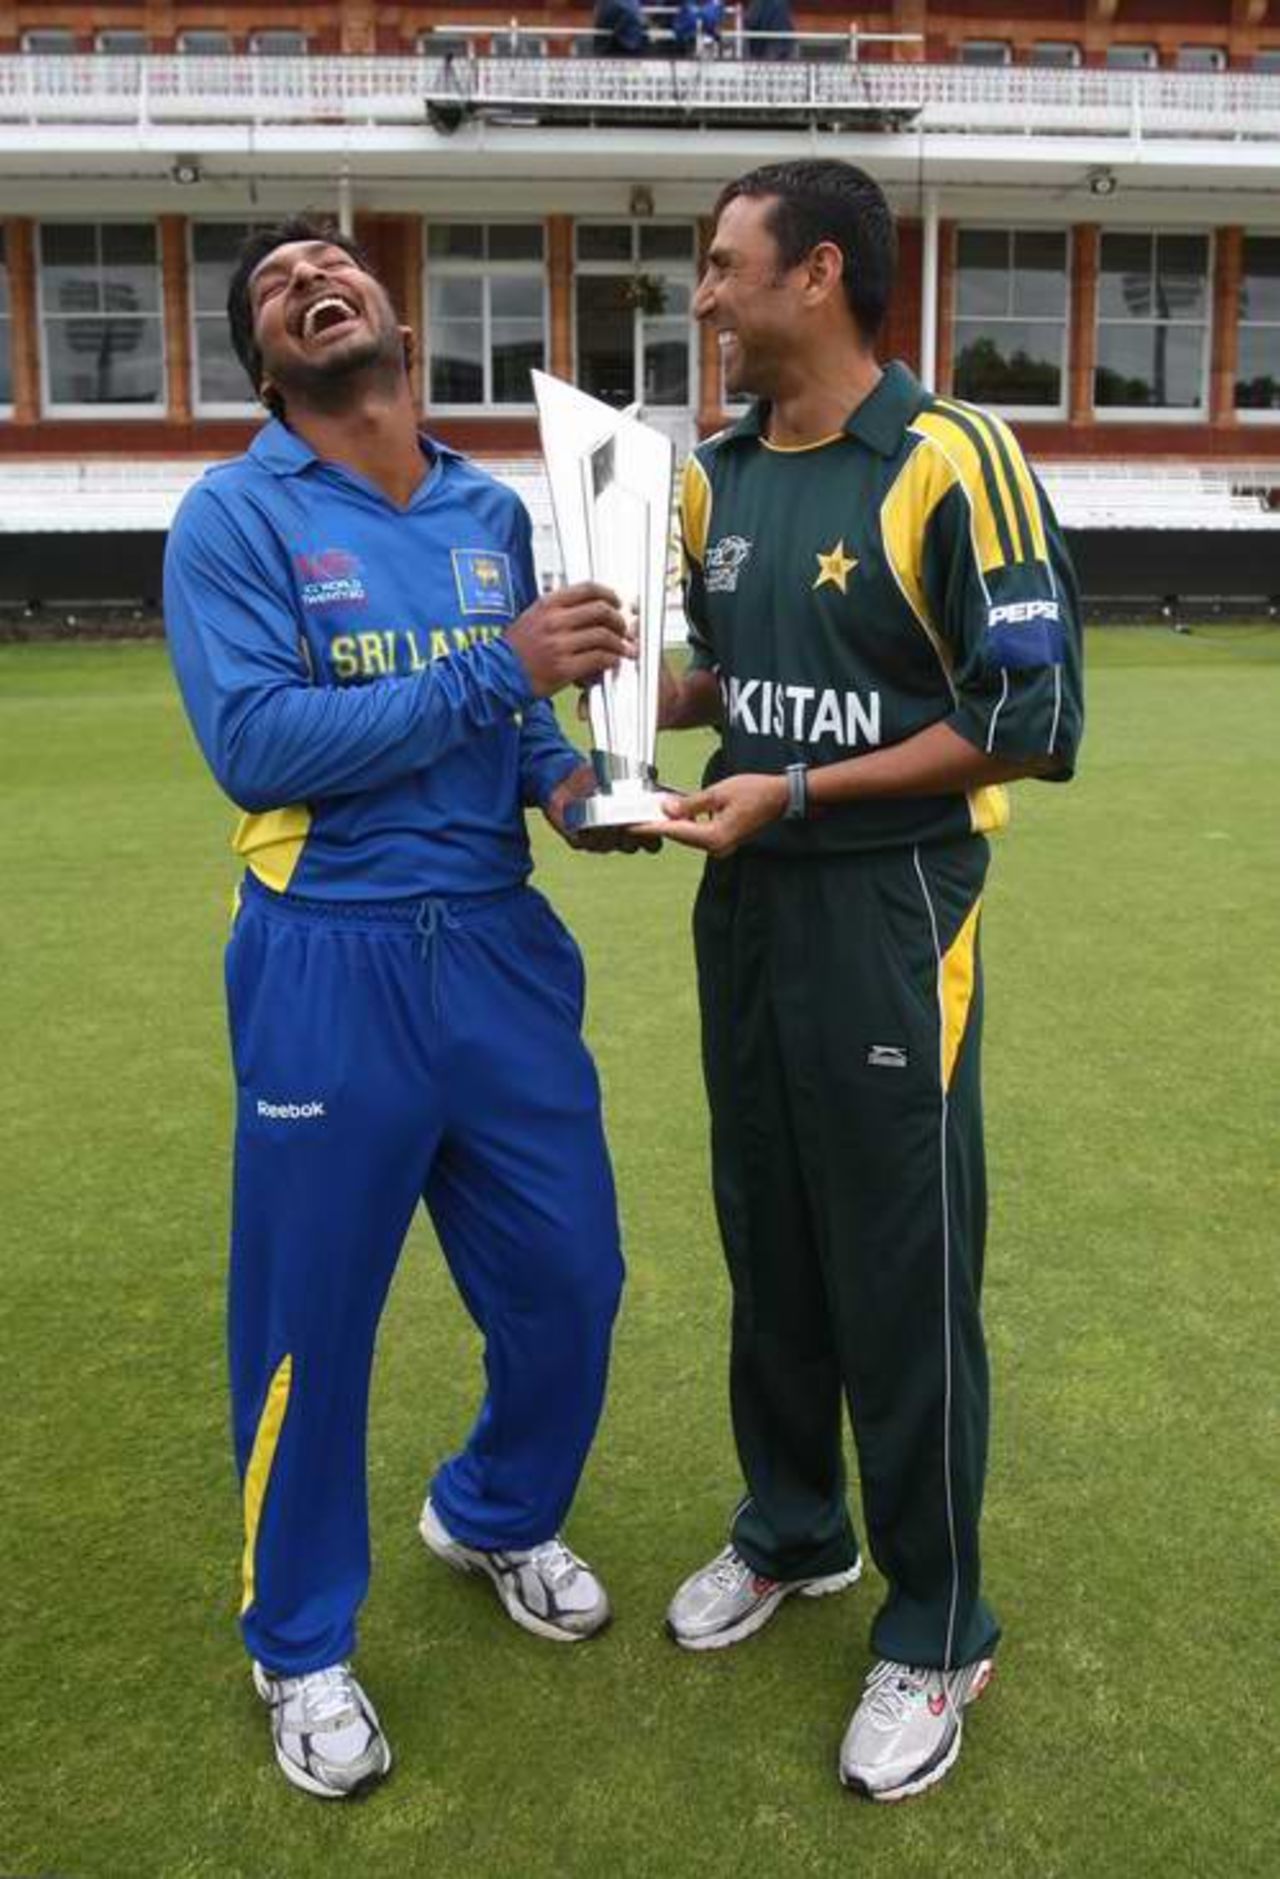 Rival captains pose on the eve of the ICC World Twenty20 finals, ICC World Twenty20 final, June 20, 2009